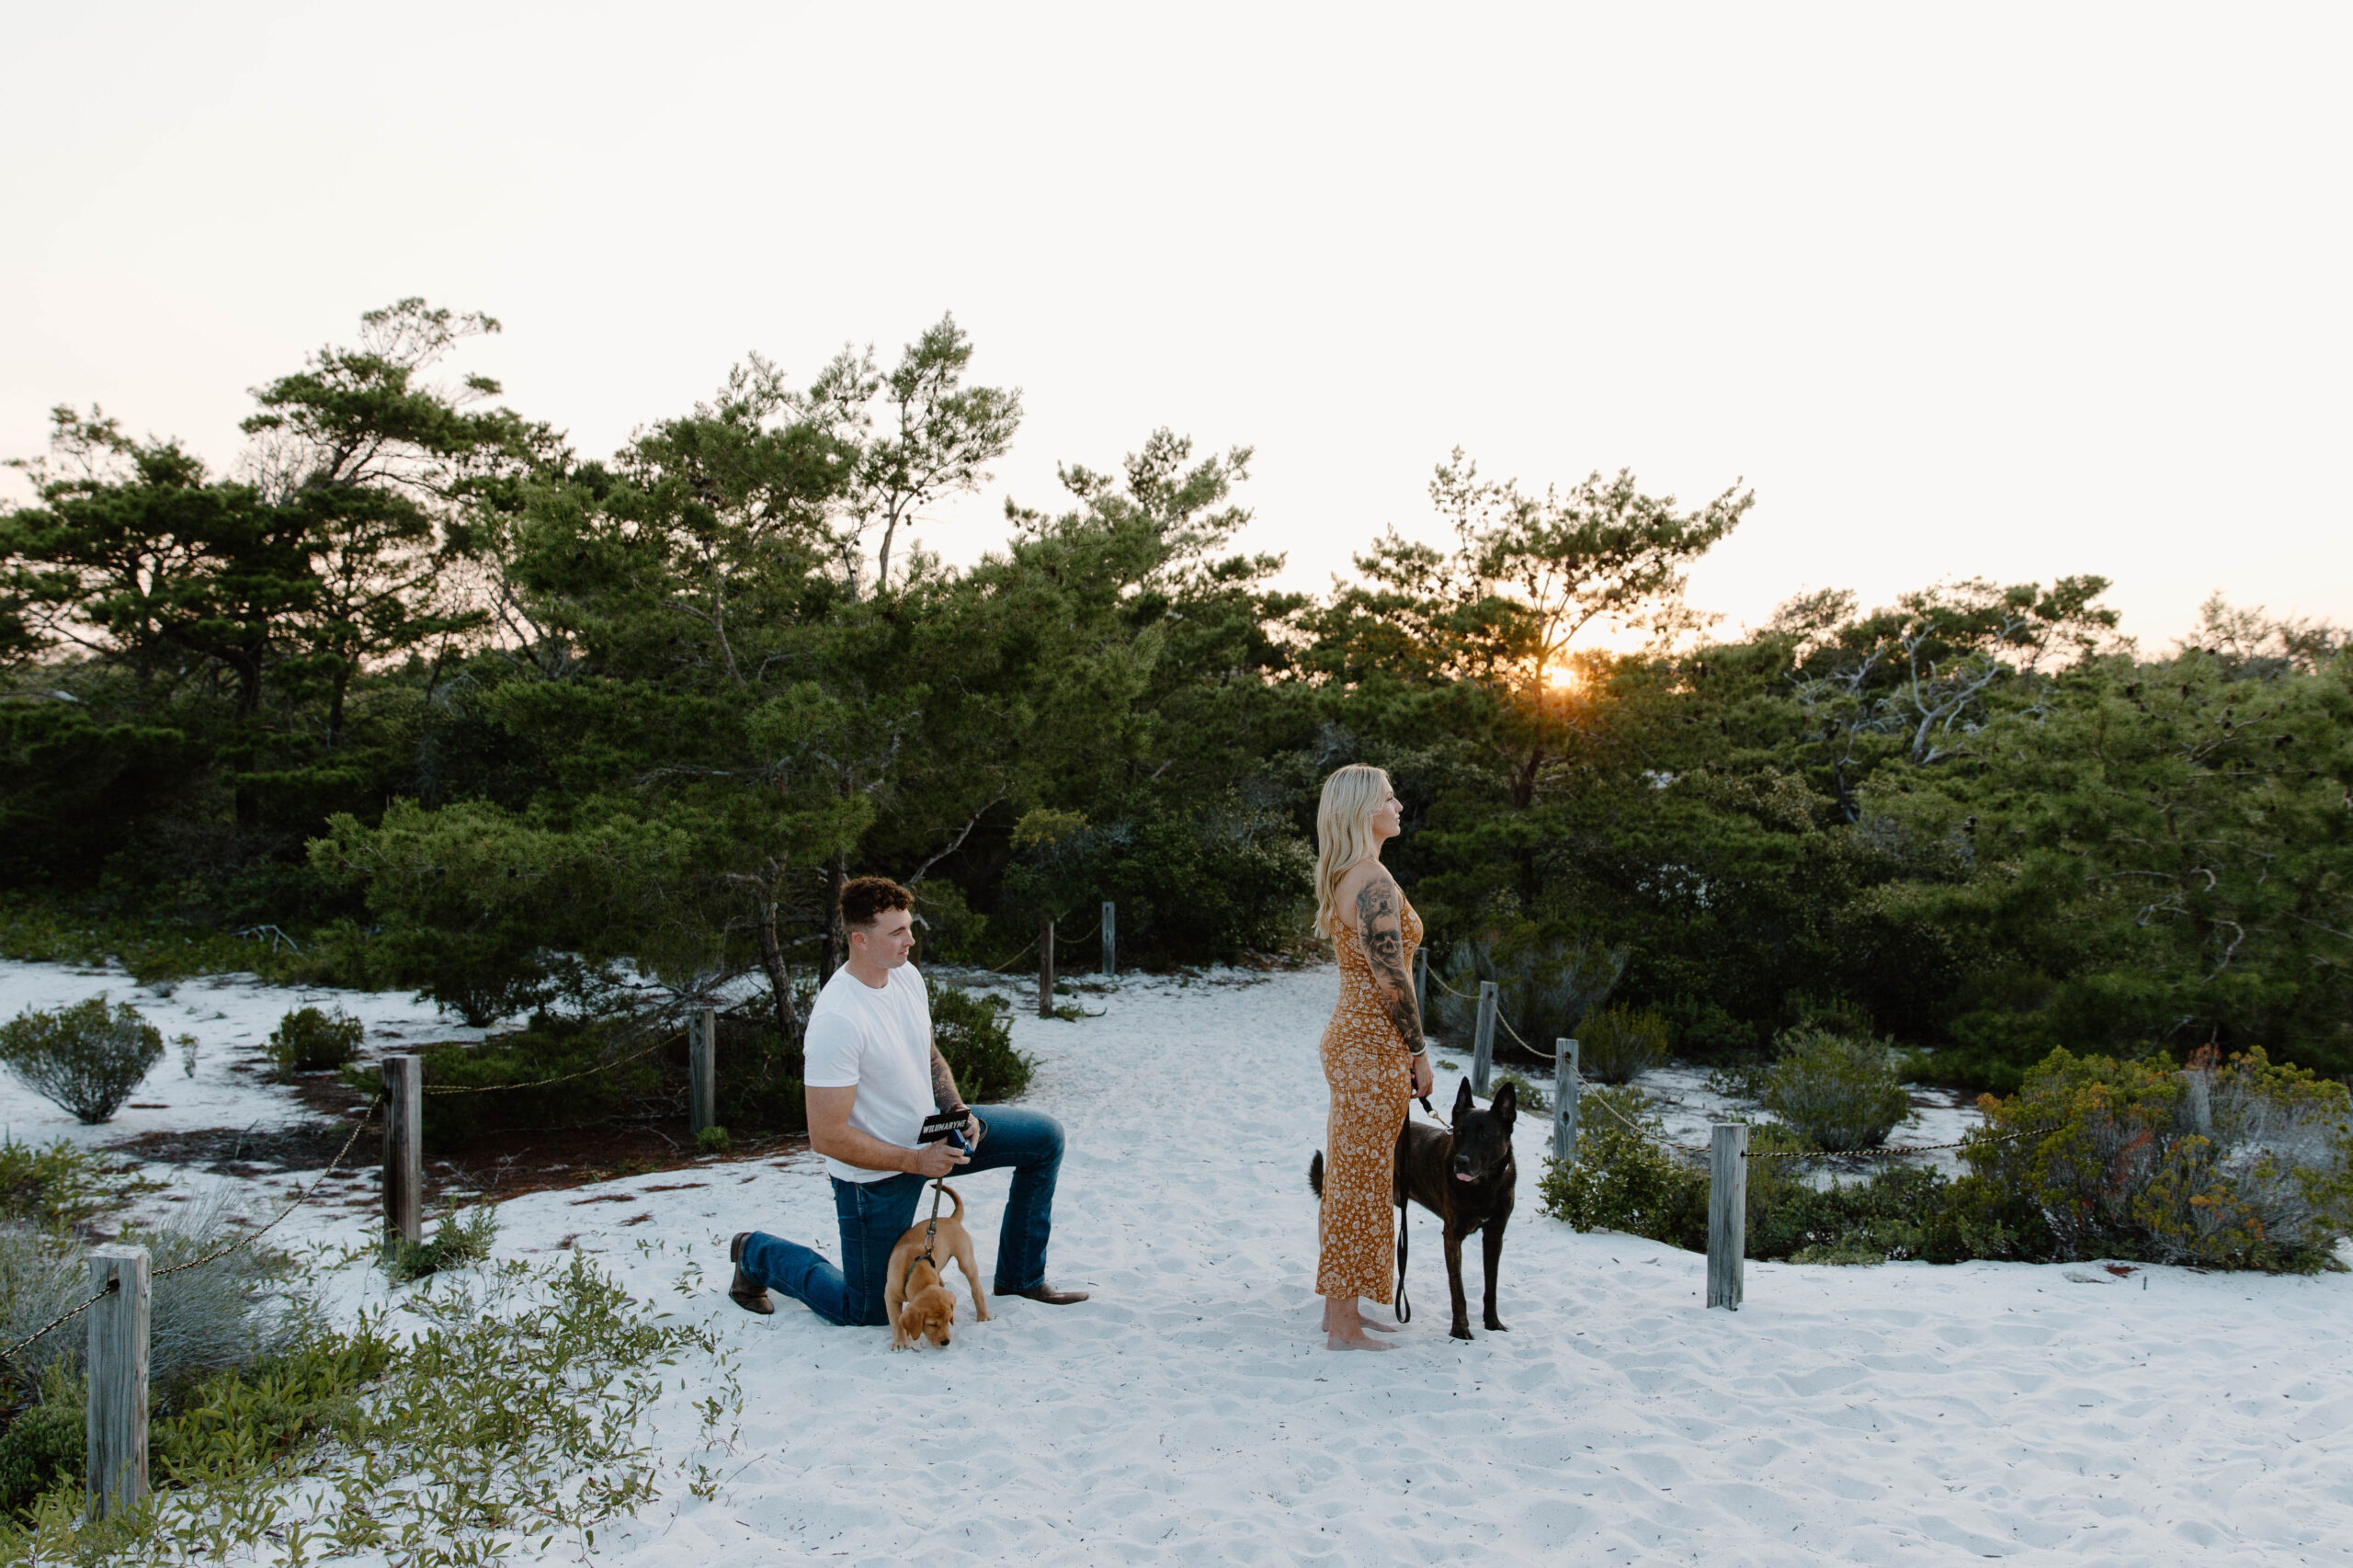 A woman with her back to her partner as he is down on one knee about to propose during a Destin Florida couple photo shoot